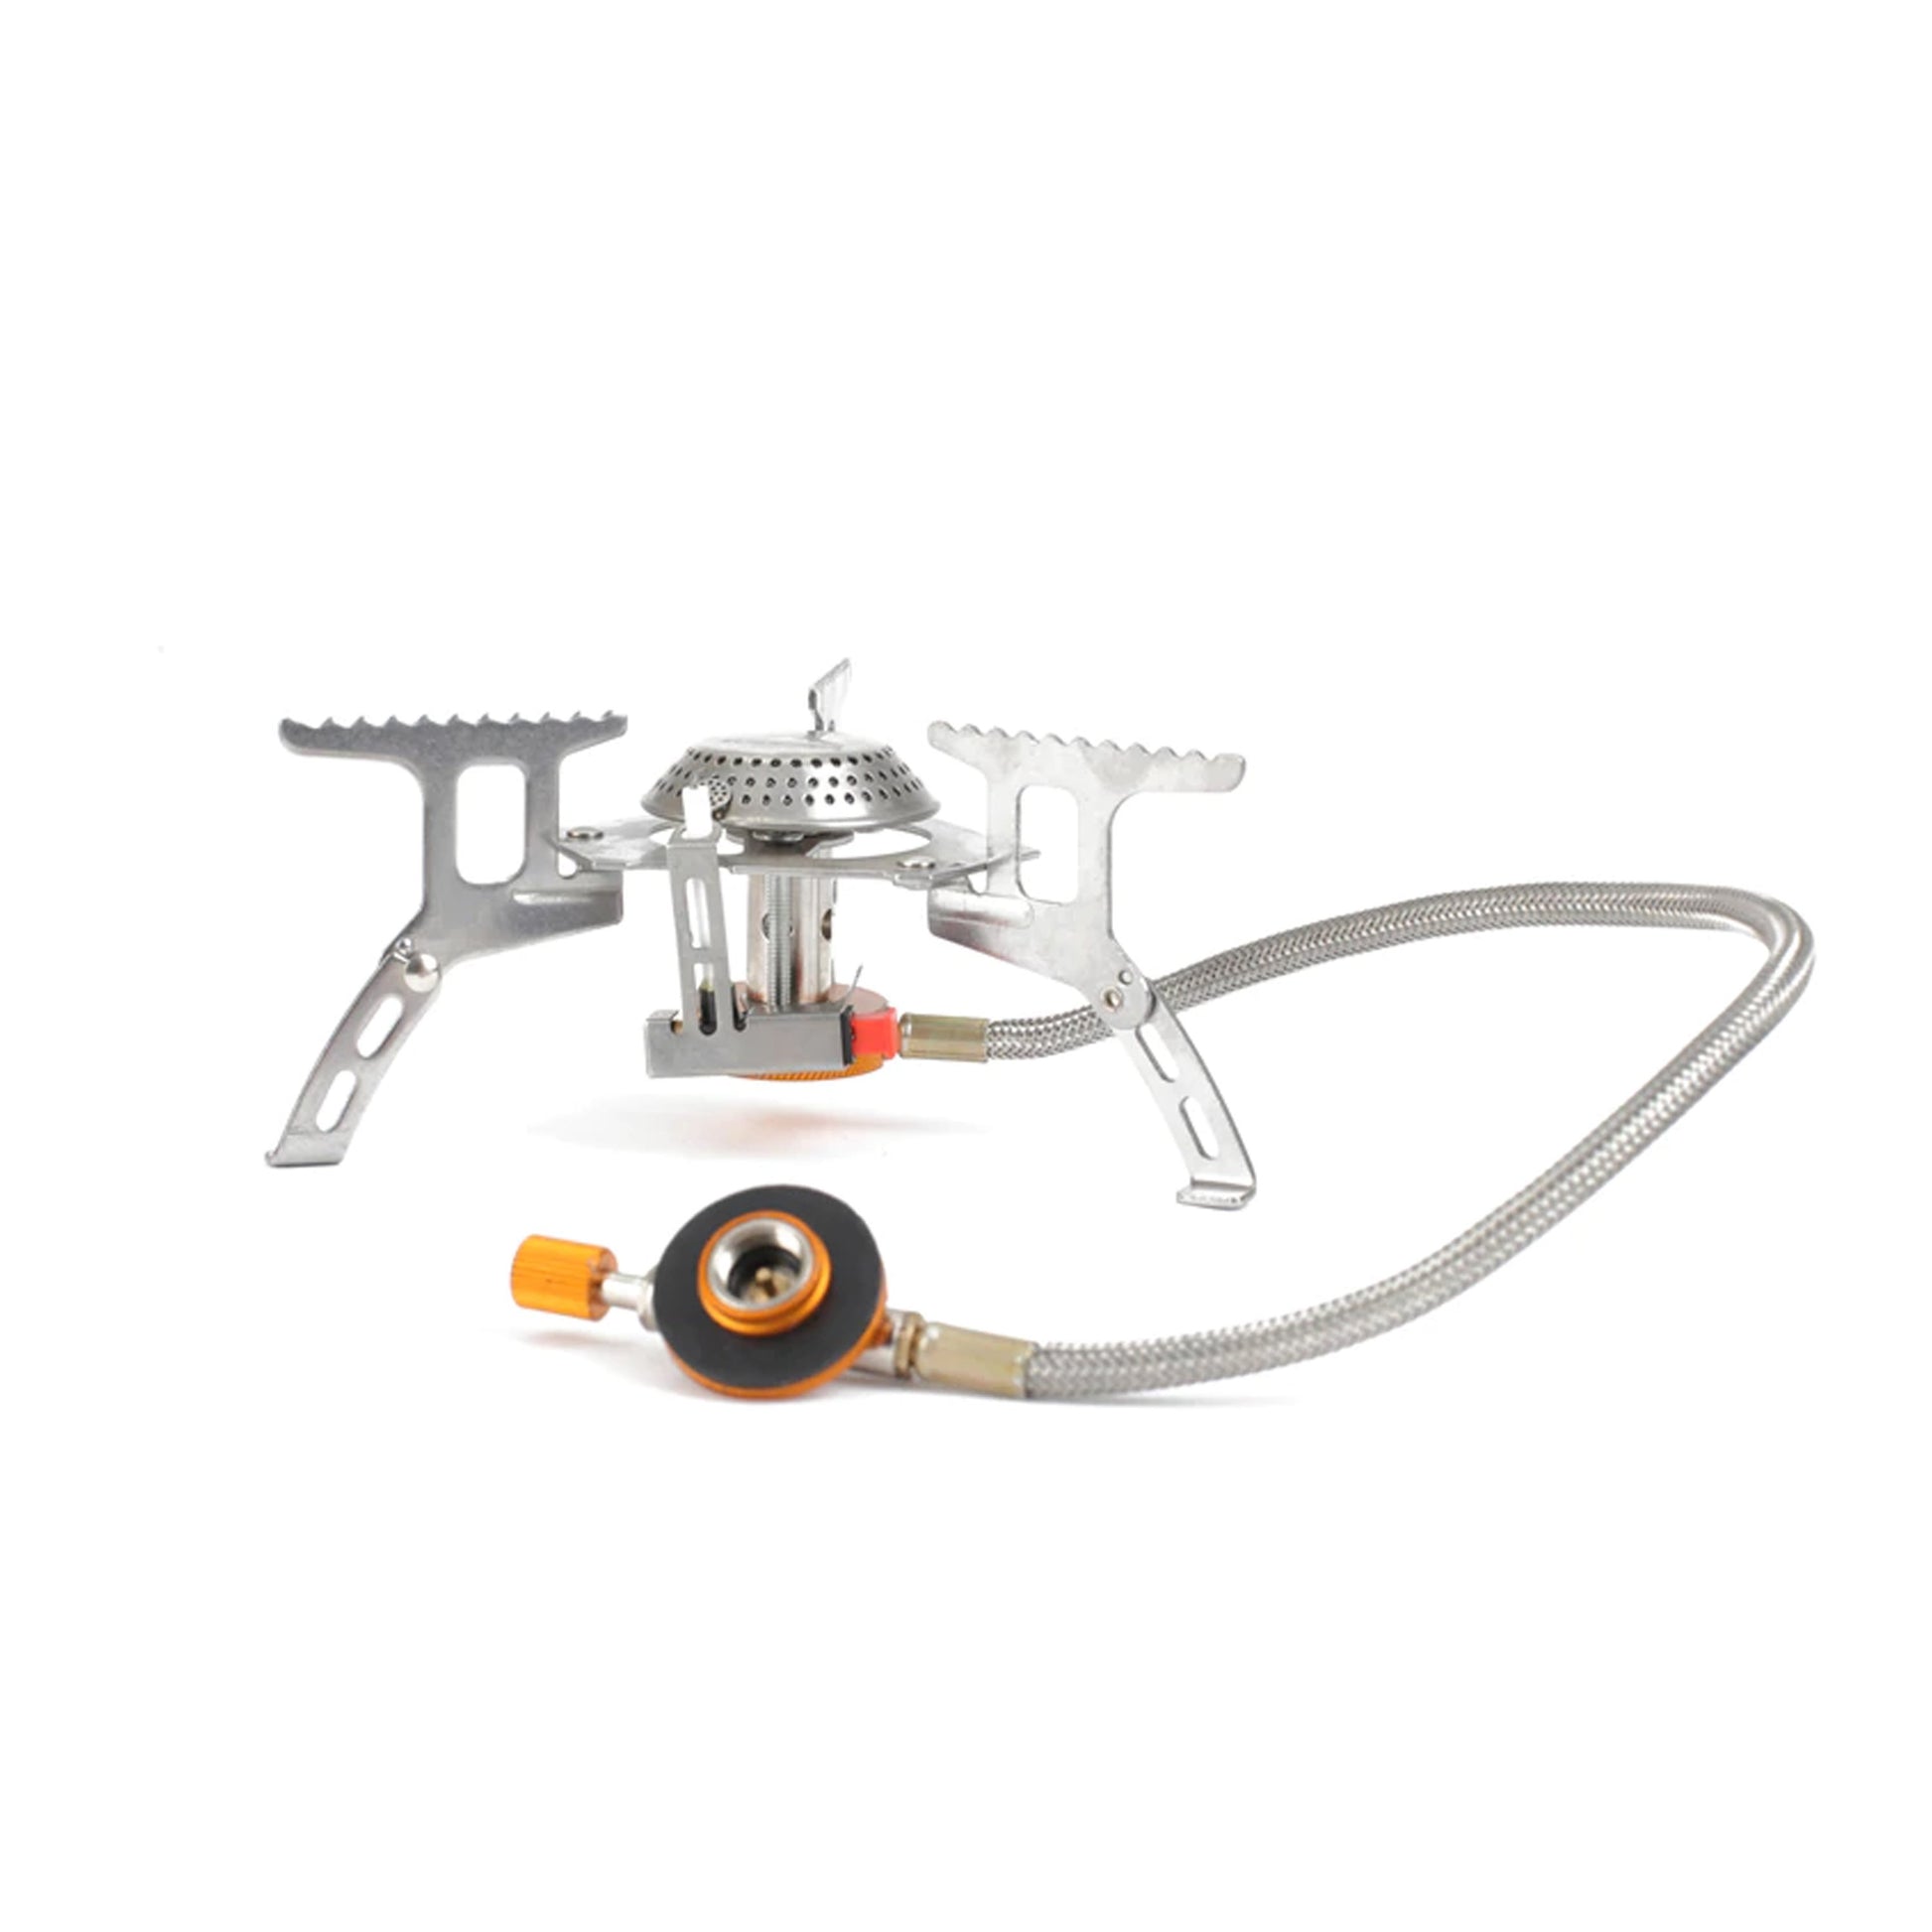 Small Portable Backpacking Camping Stove - Westfield Retailers